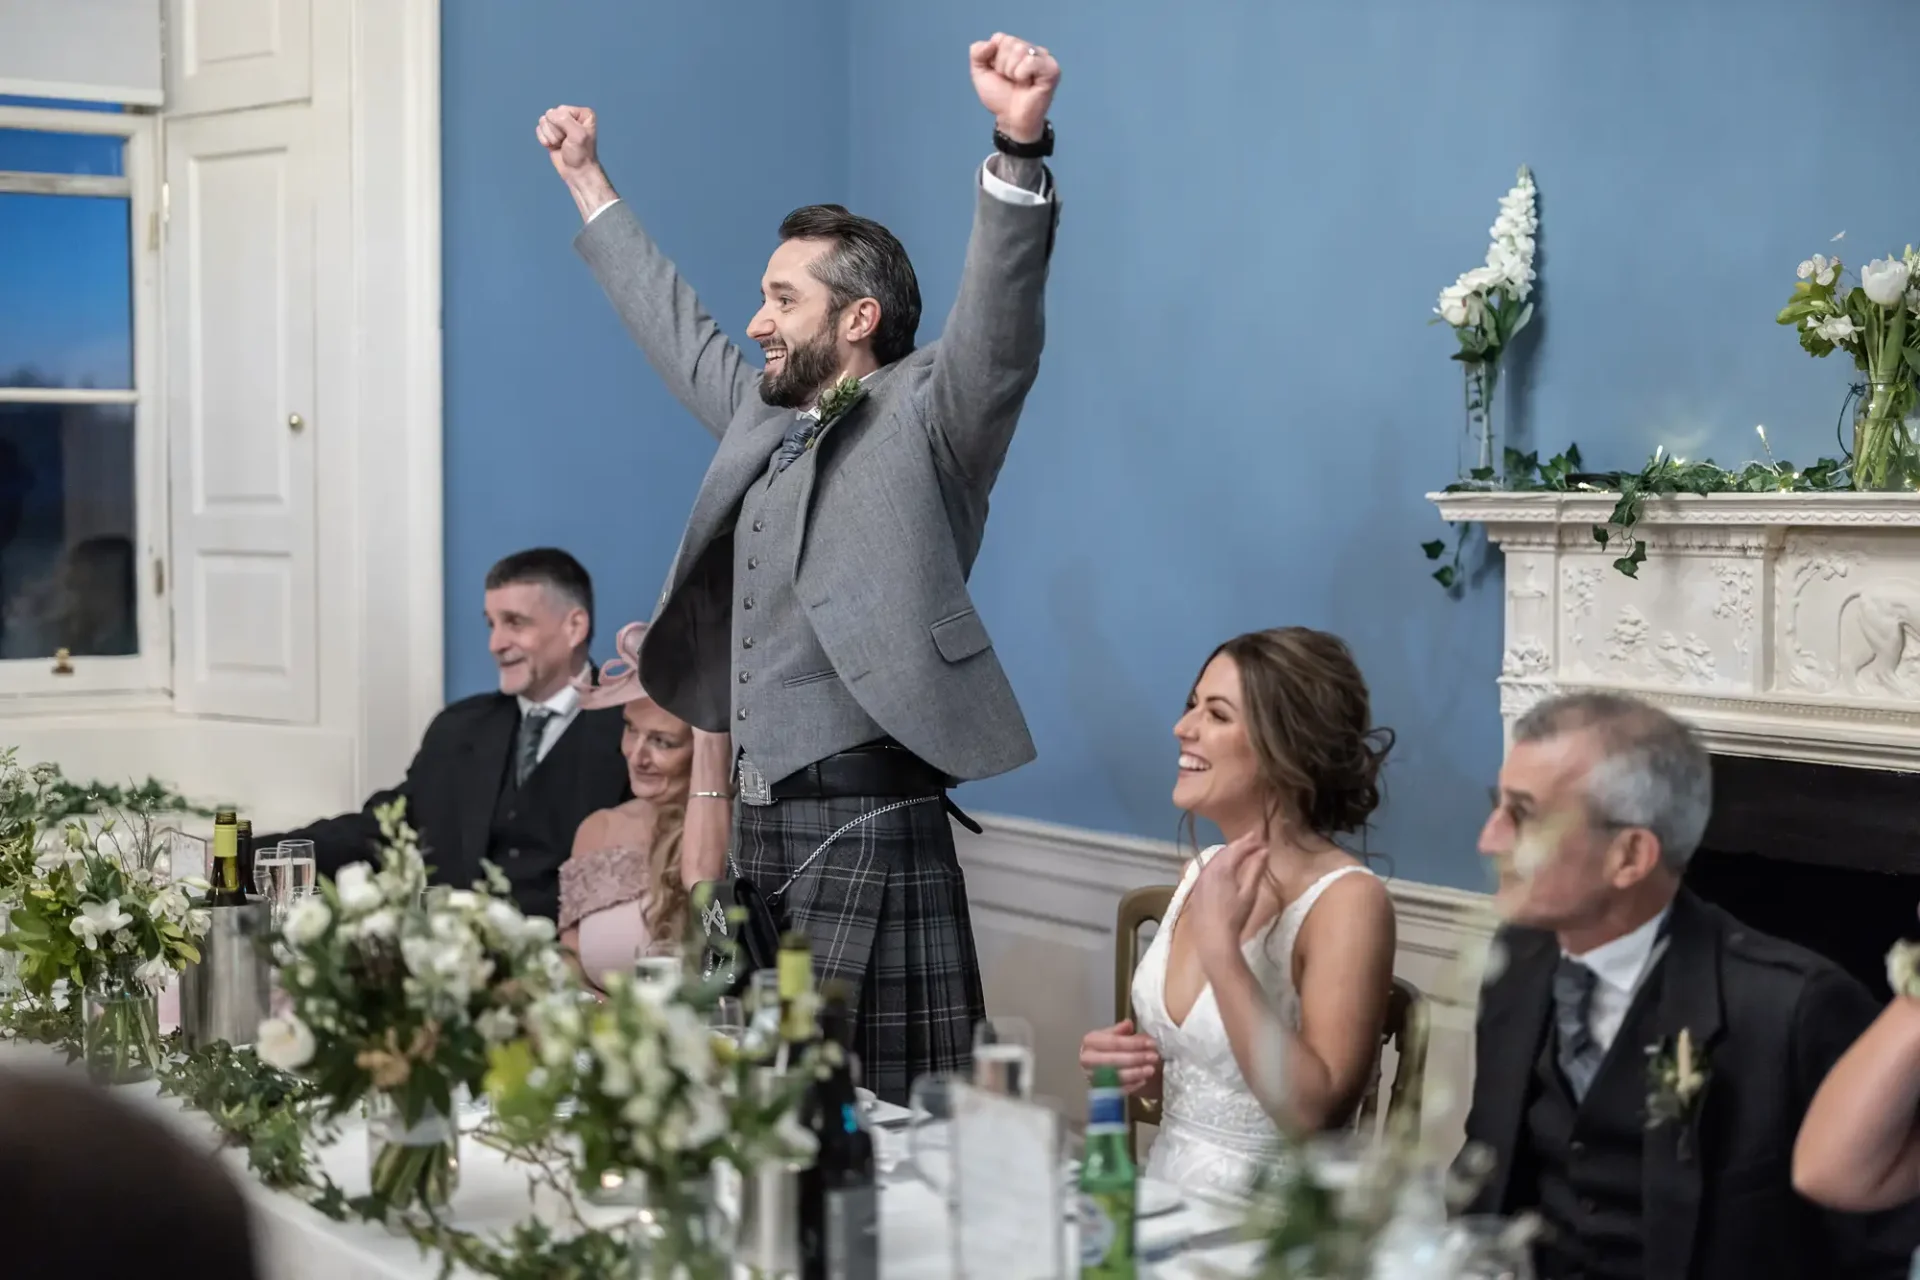 A man in a kilt and vest excitedly raises his arms at a wedding reception, while a smiling woman seated next to him claps, surrounded by other guests.